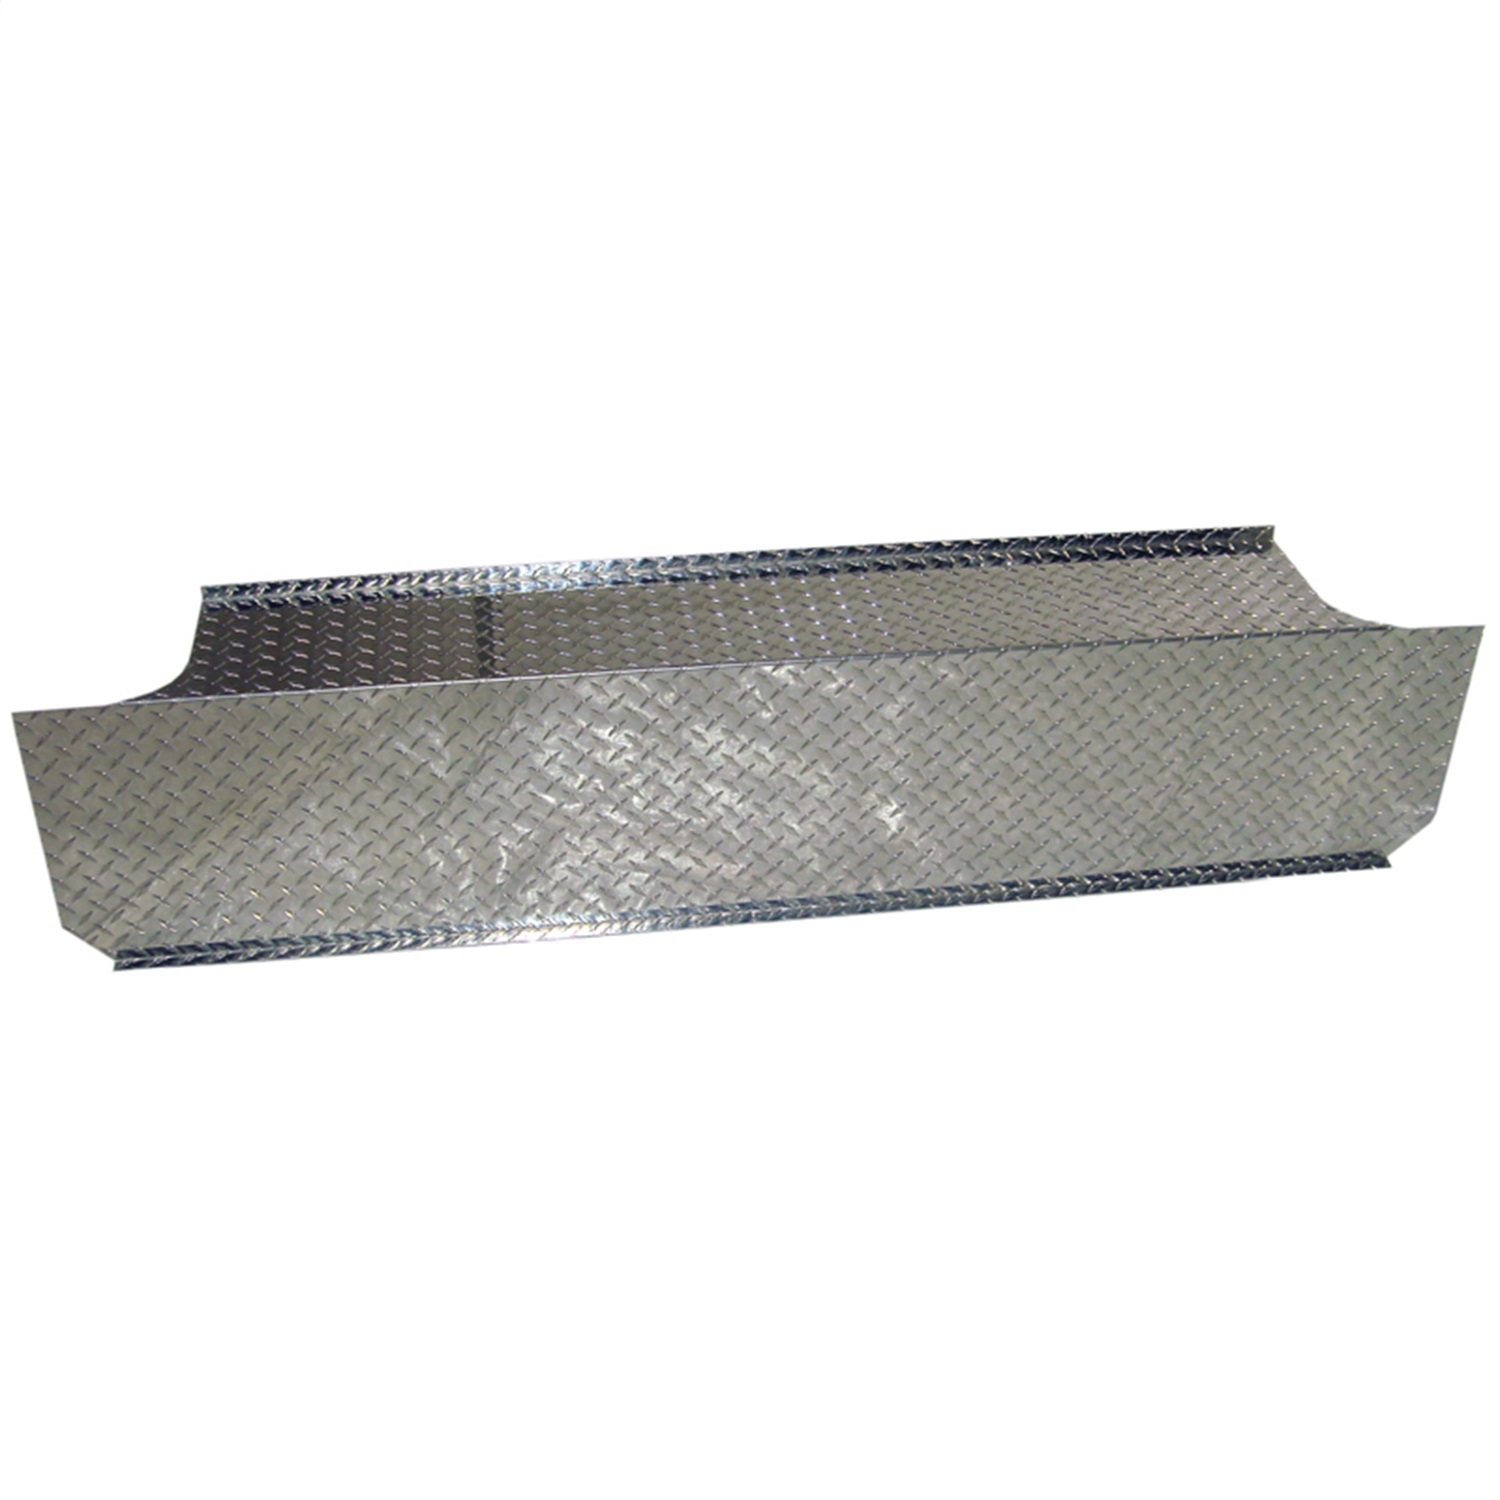 MBRP Exhaust MBRP Exhaust BB0002 Smokers; Checker Plate Exhaust Stack Cover